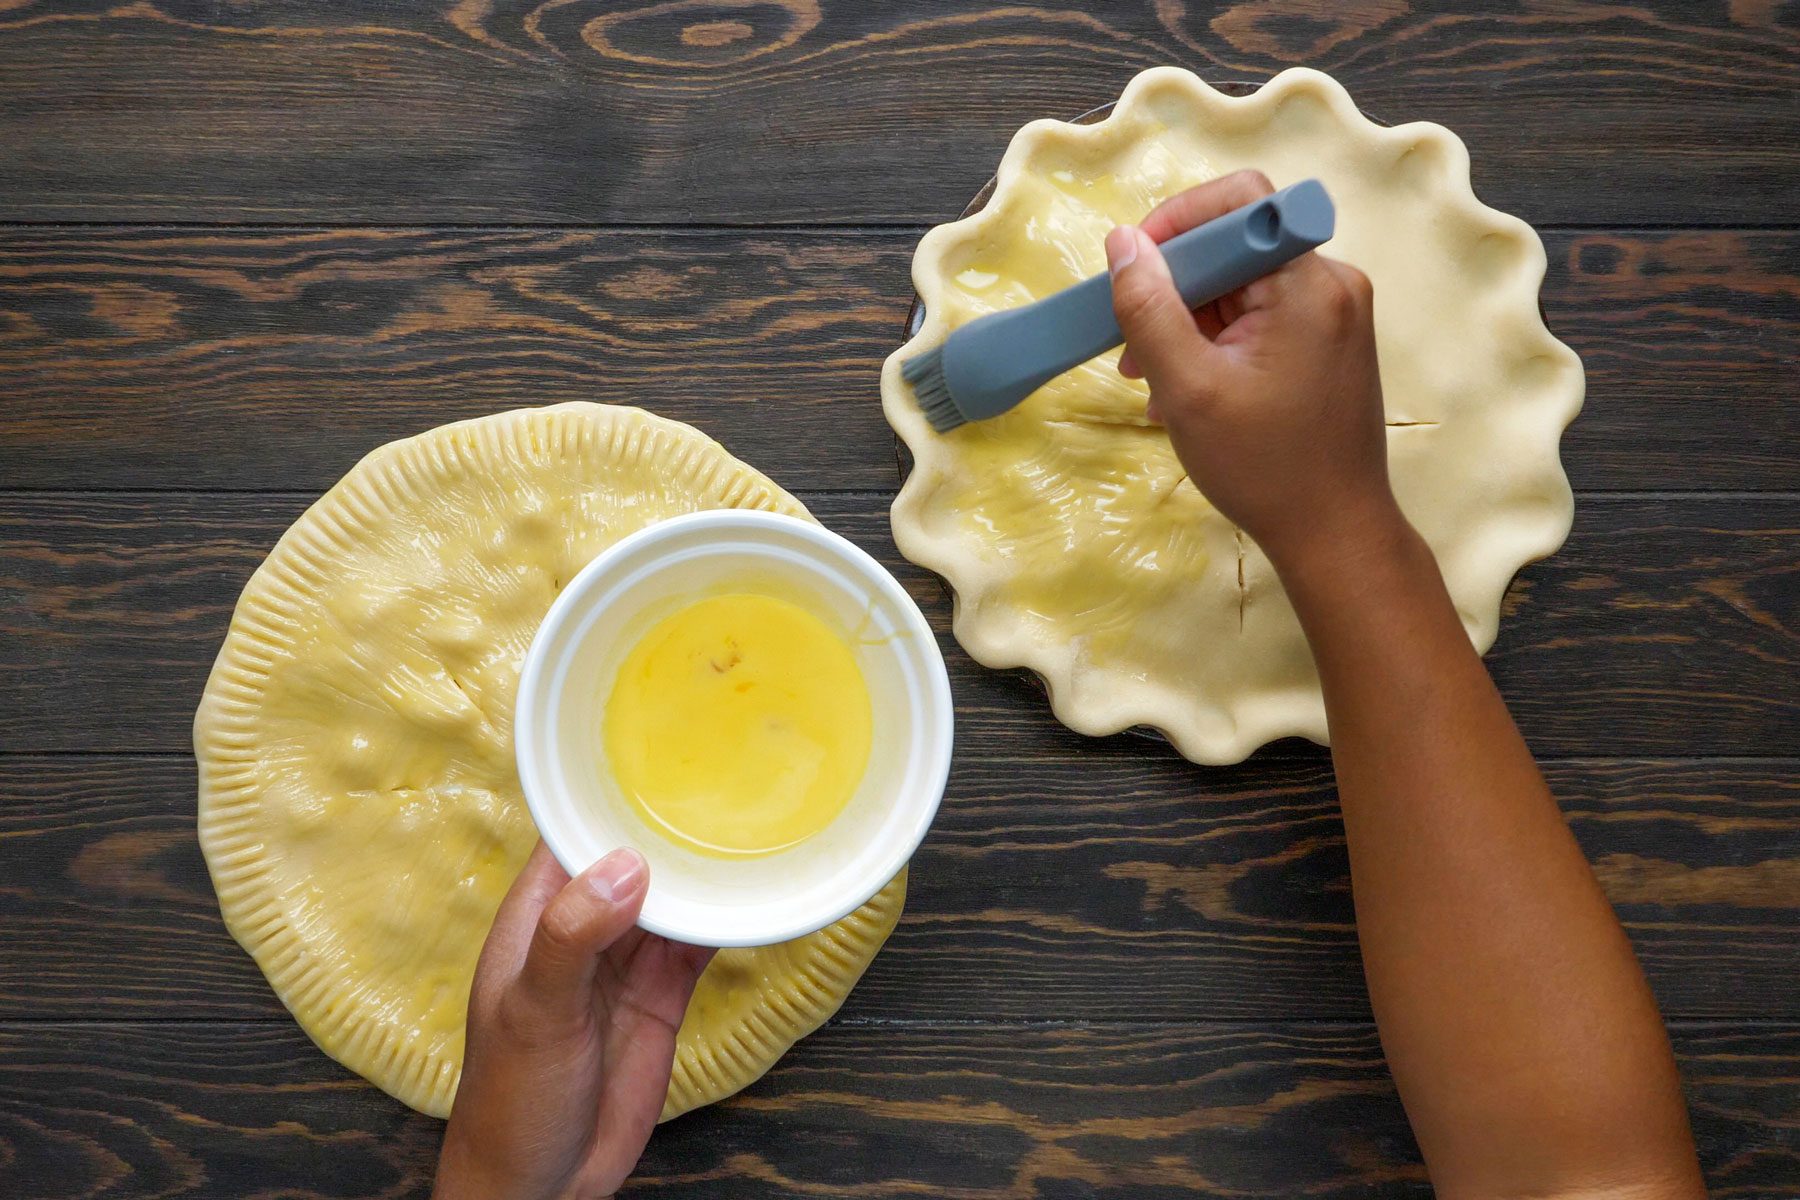 Pie crust is brushed over with egg yolk and butter to make Turkey Potpies